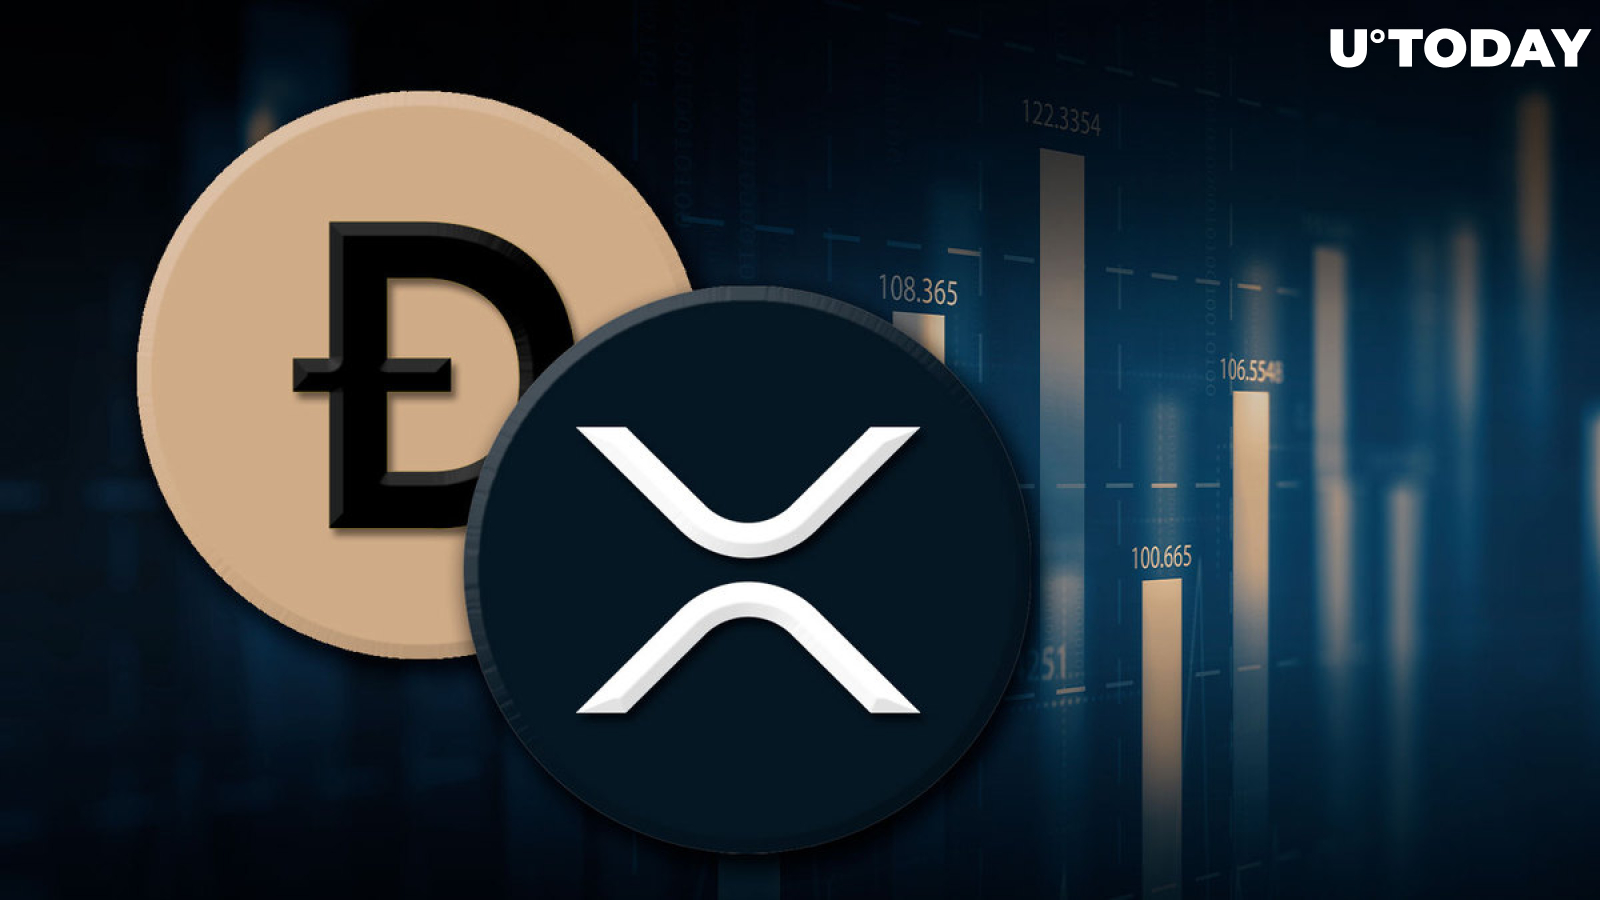 XRP and DOGE Prices 'Wake Up' According to This New Metric